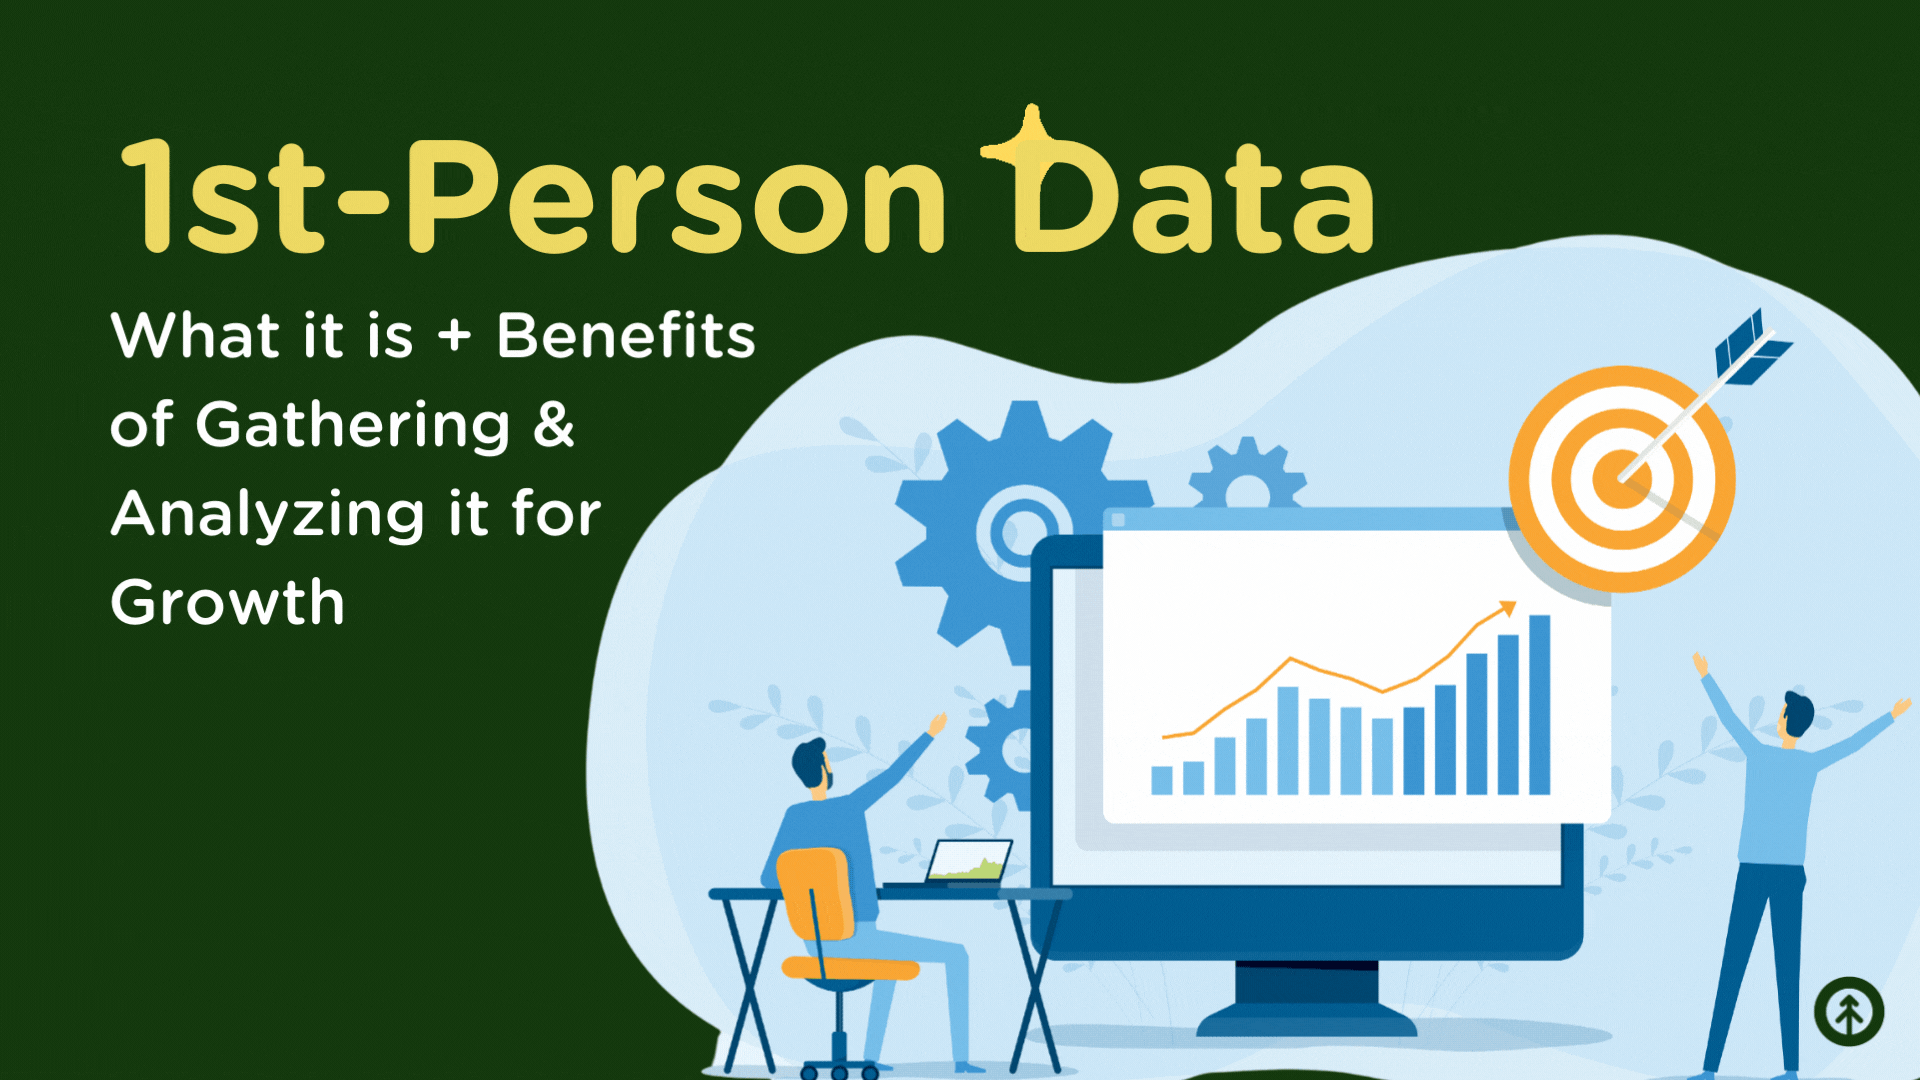 Top 3 Benefits of Gathering + Analyzing 1st-Person Data for Growth